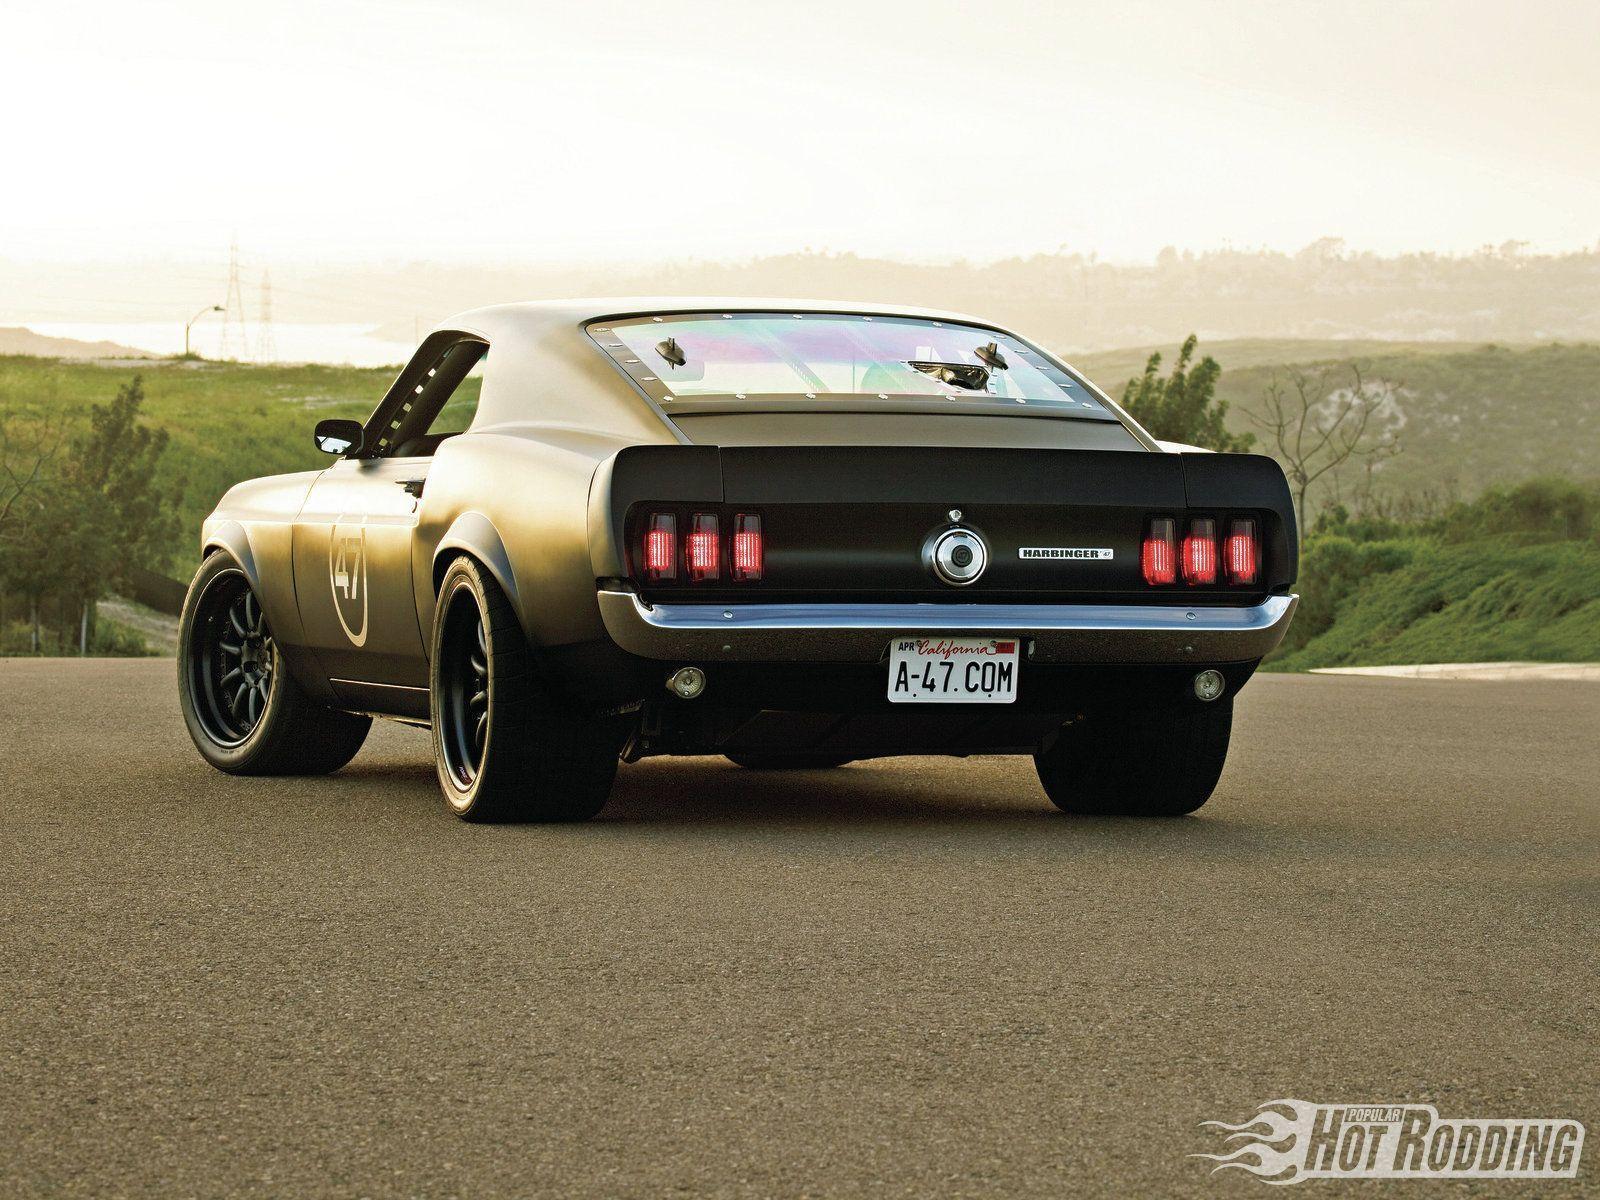 39+ 69 Mustang Tubbed Out Rear End Wallpaper free download